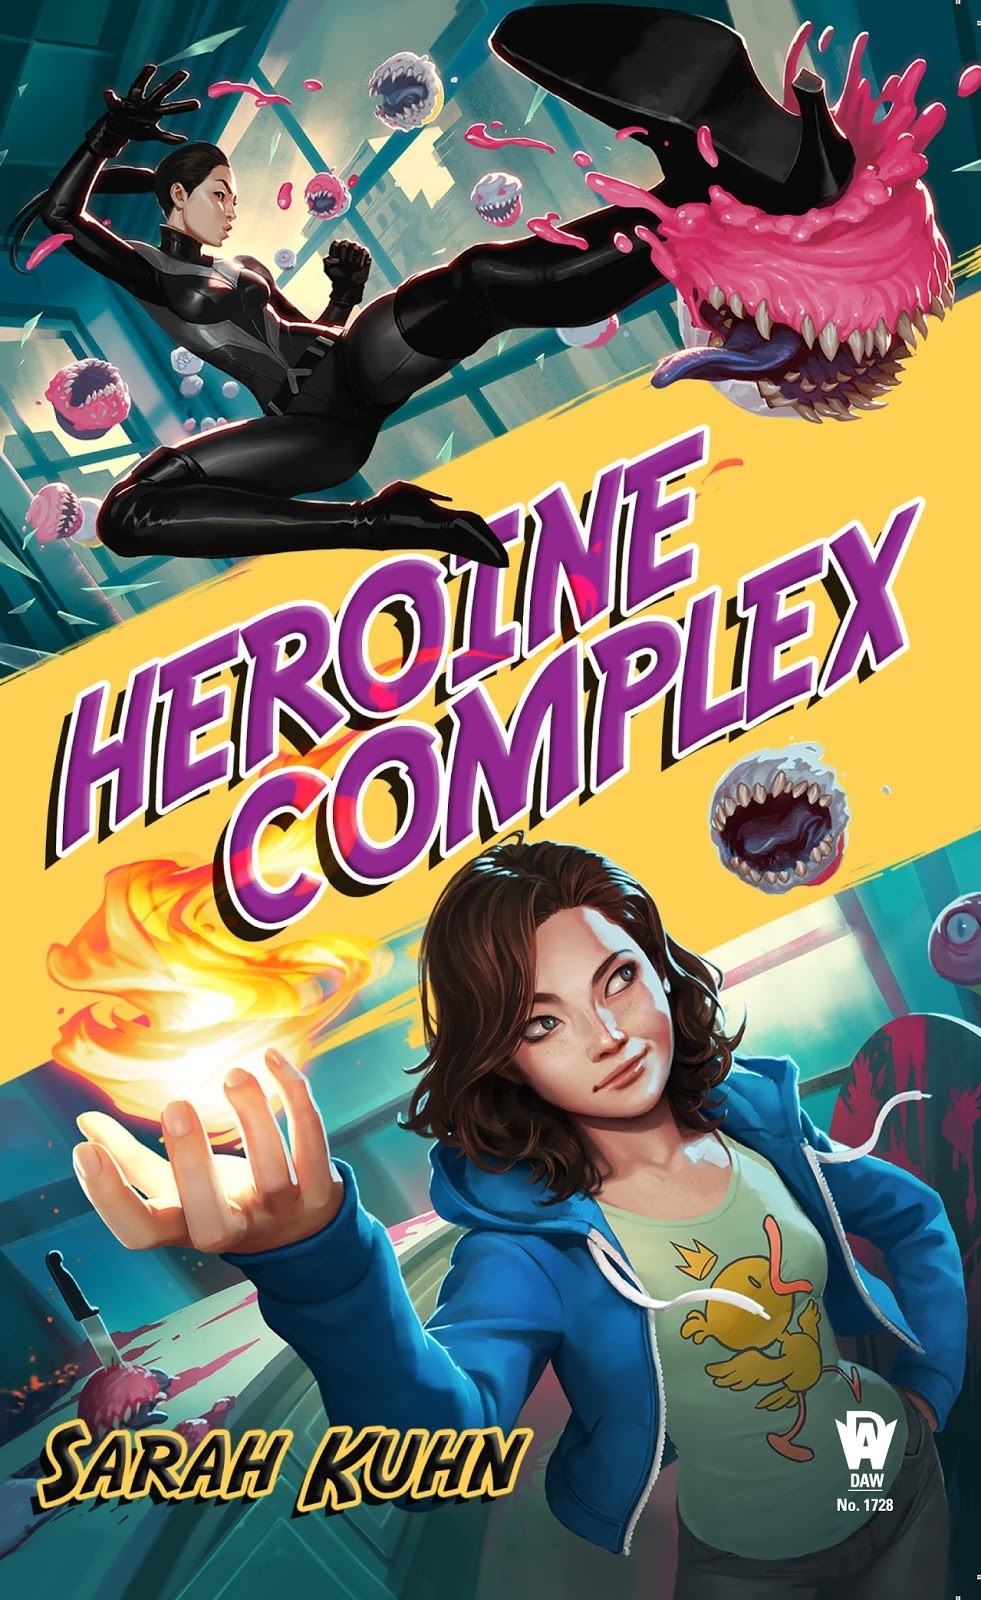 Heroine Complex obok cover. Book by Sarah Kuhn.